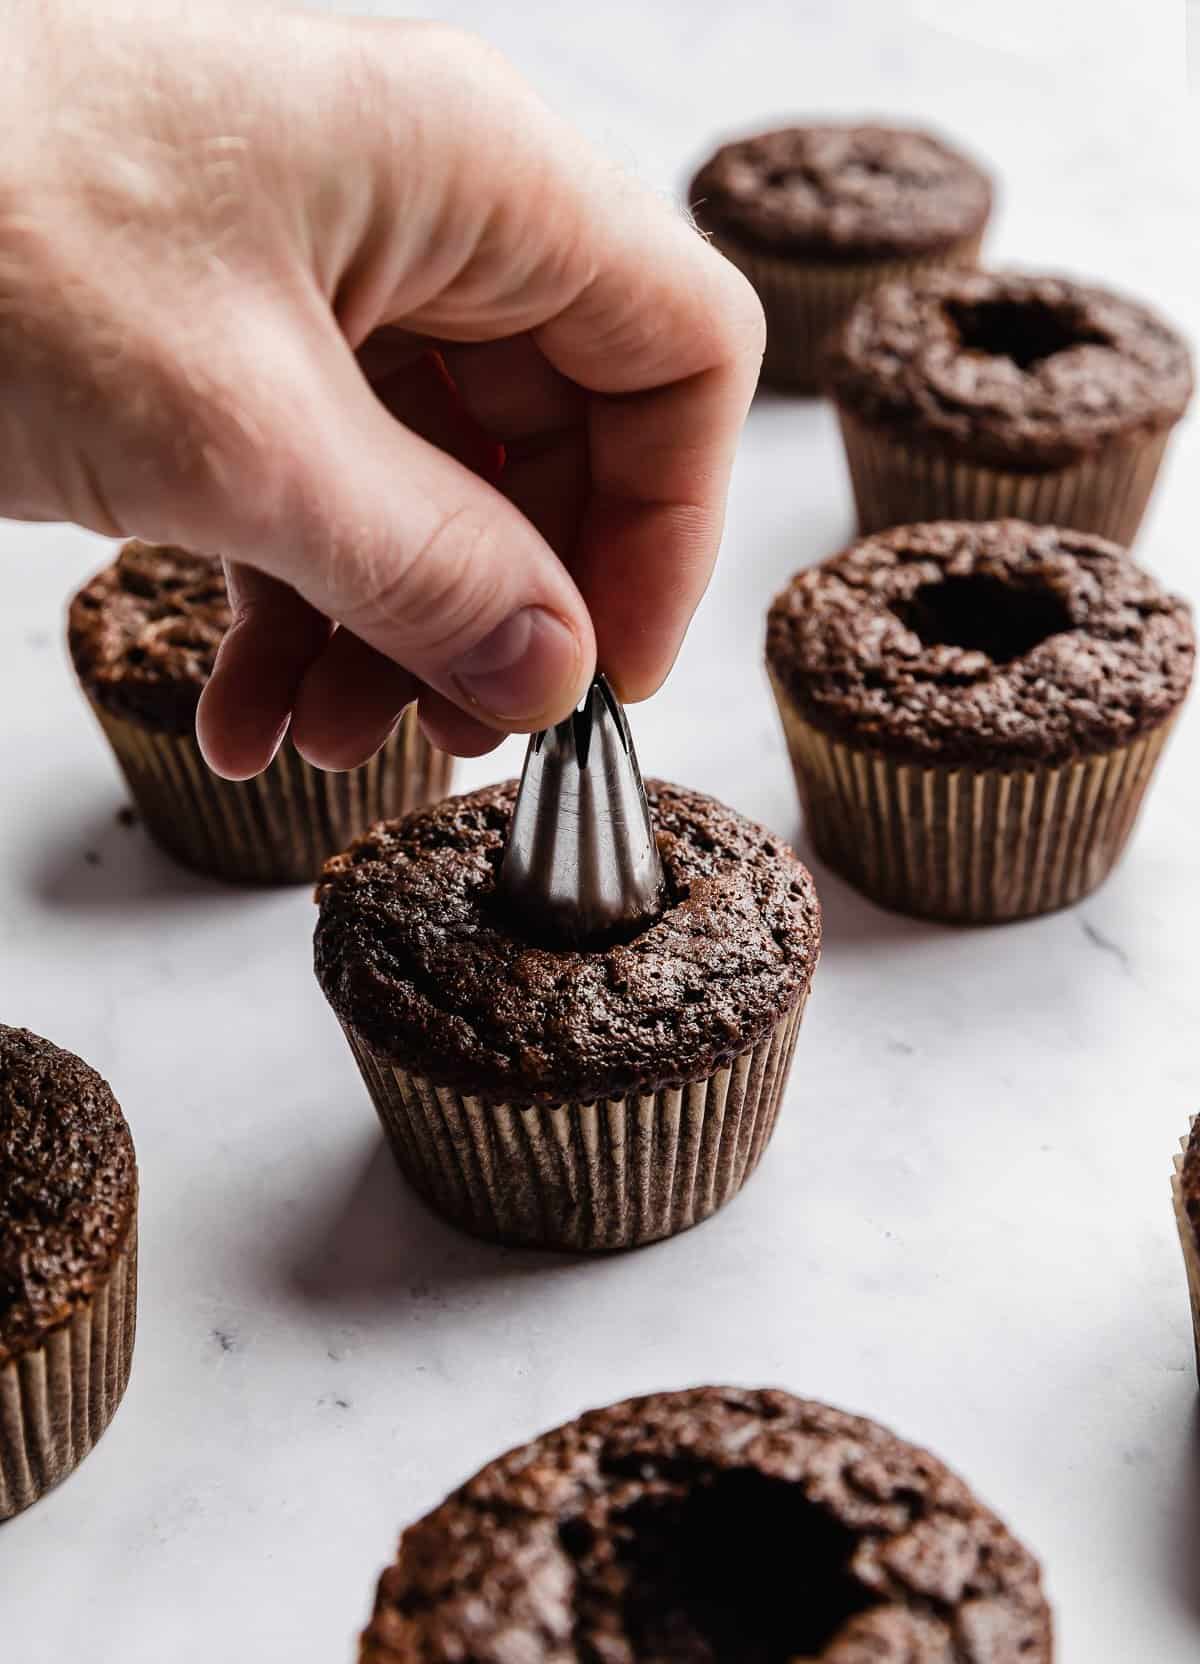 A hand using a piping tip to remove the core of a chocolate cupcake.